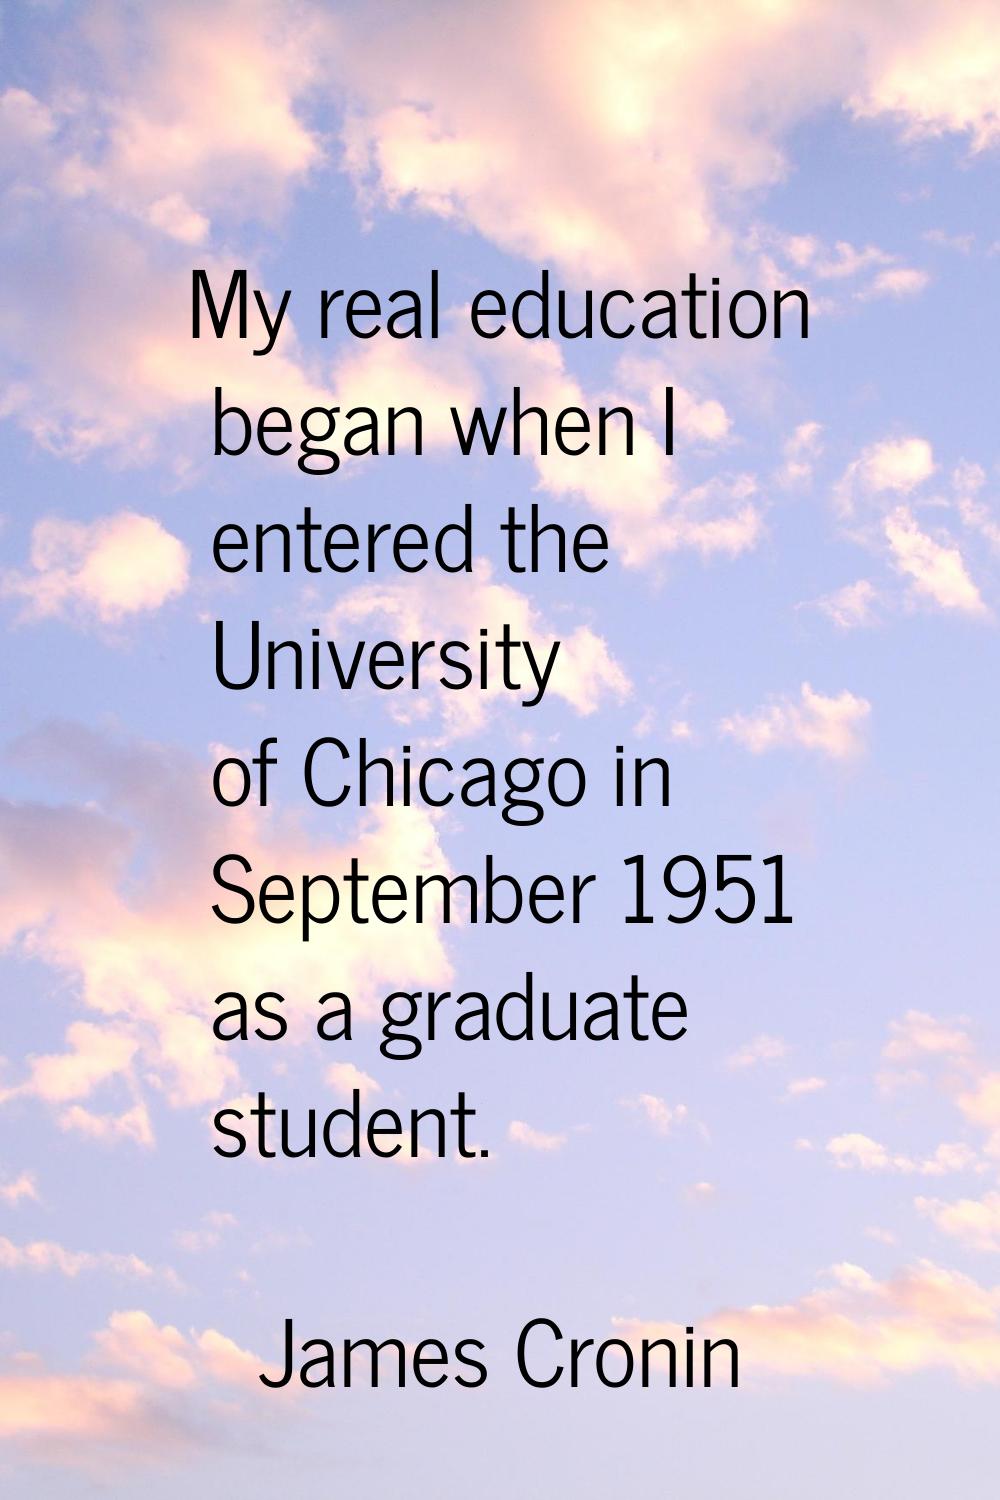 My real education began when I entered the University of Chicago in September 1951 as a graduate st